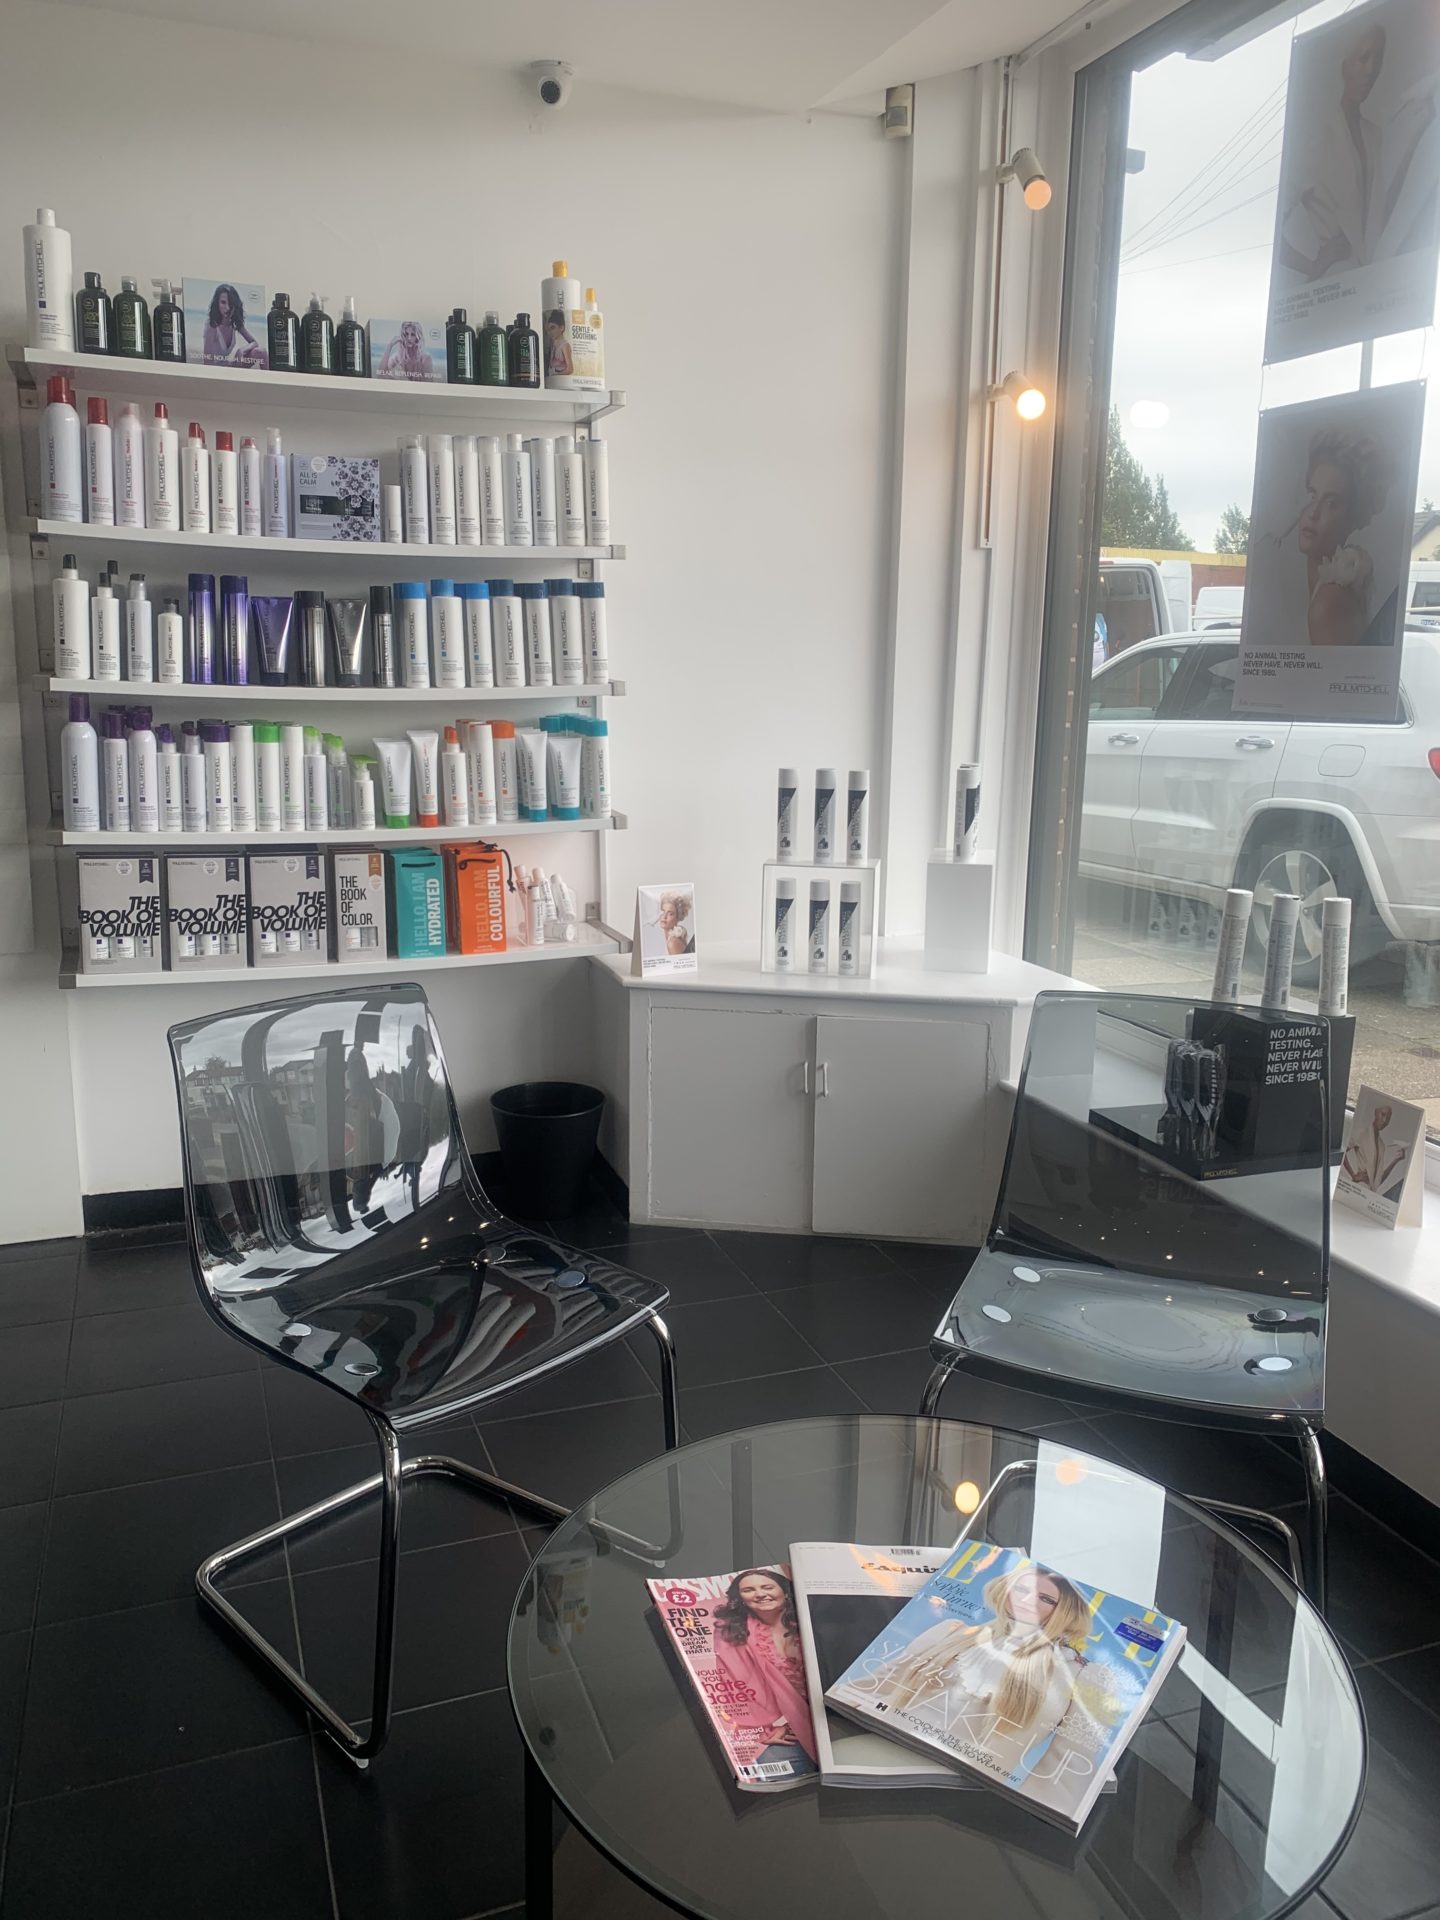 VISIT THE TOP HAIR SALON IN LIVERPOOL AT ESENTIA HAIR AND BEAUTY